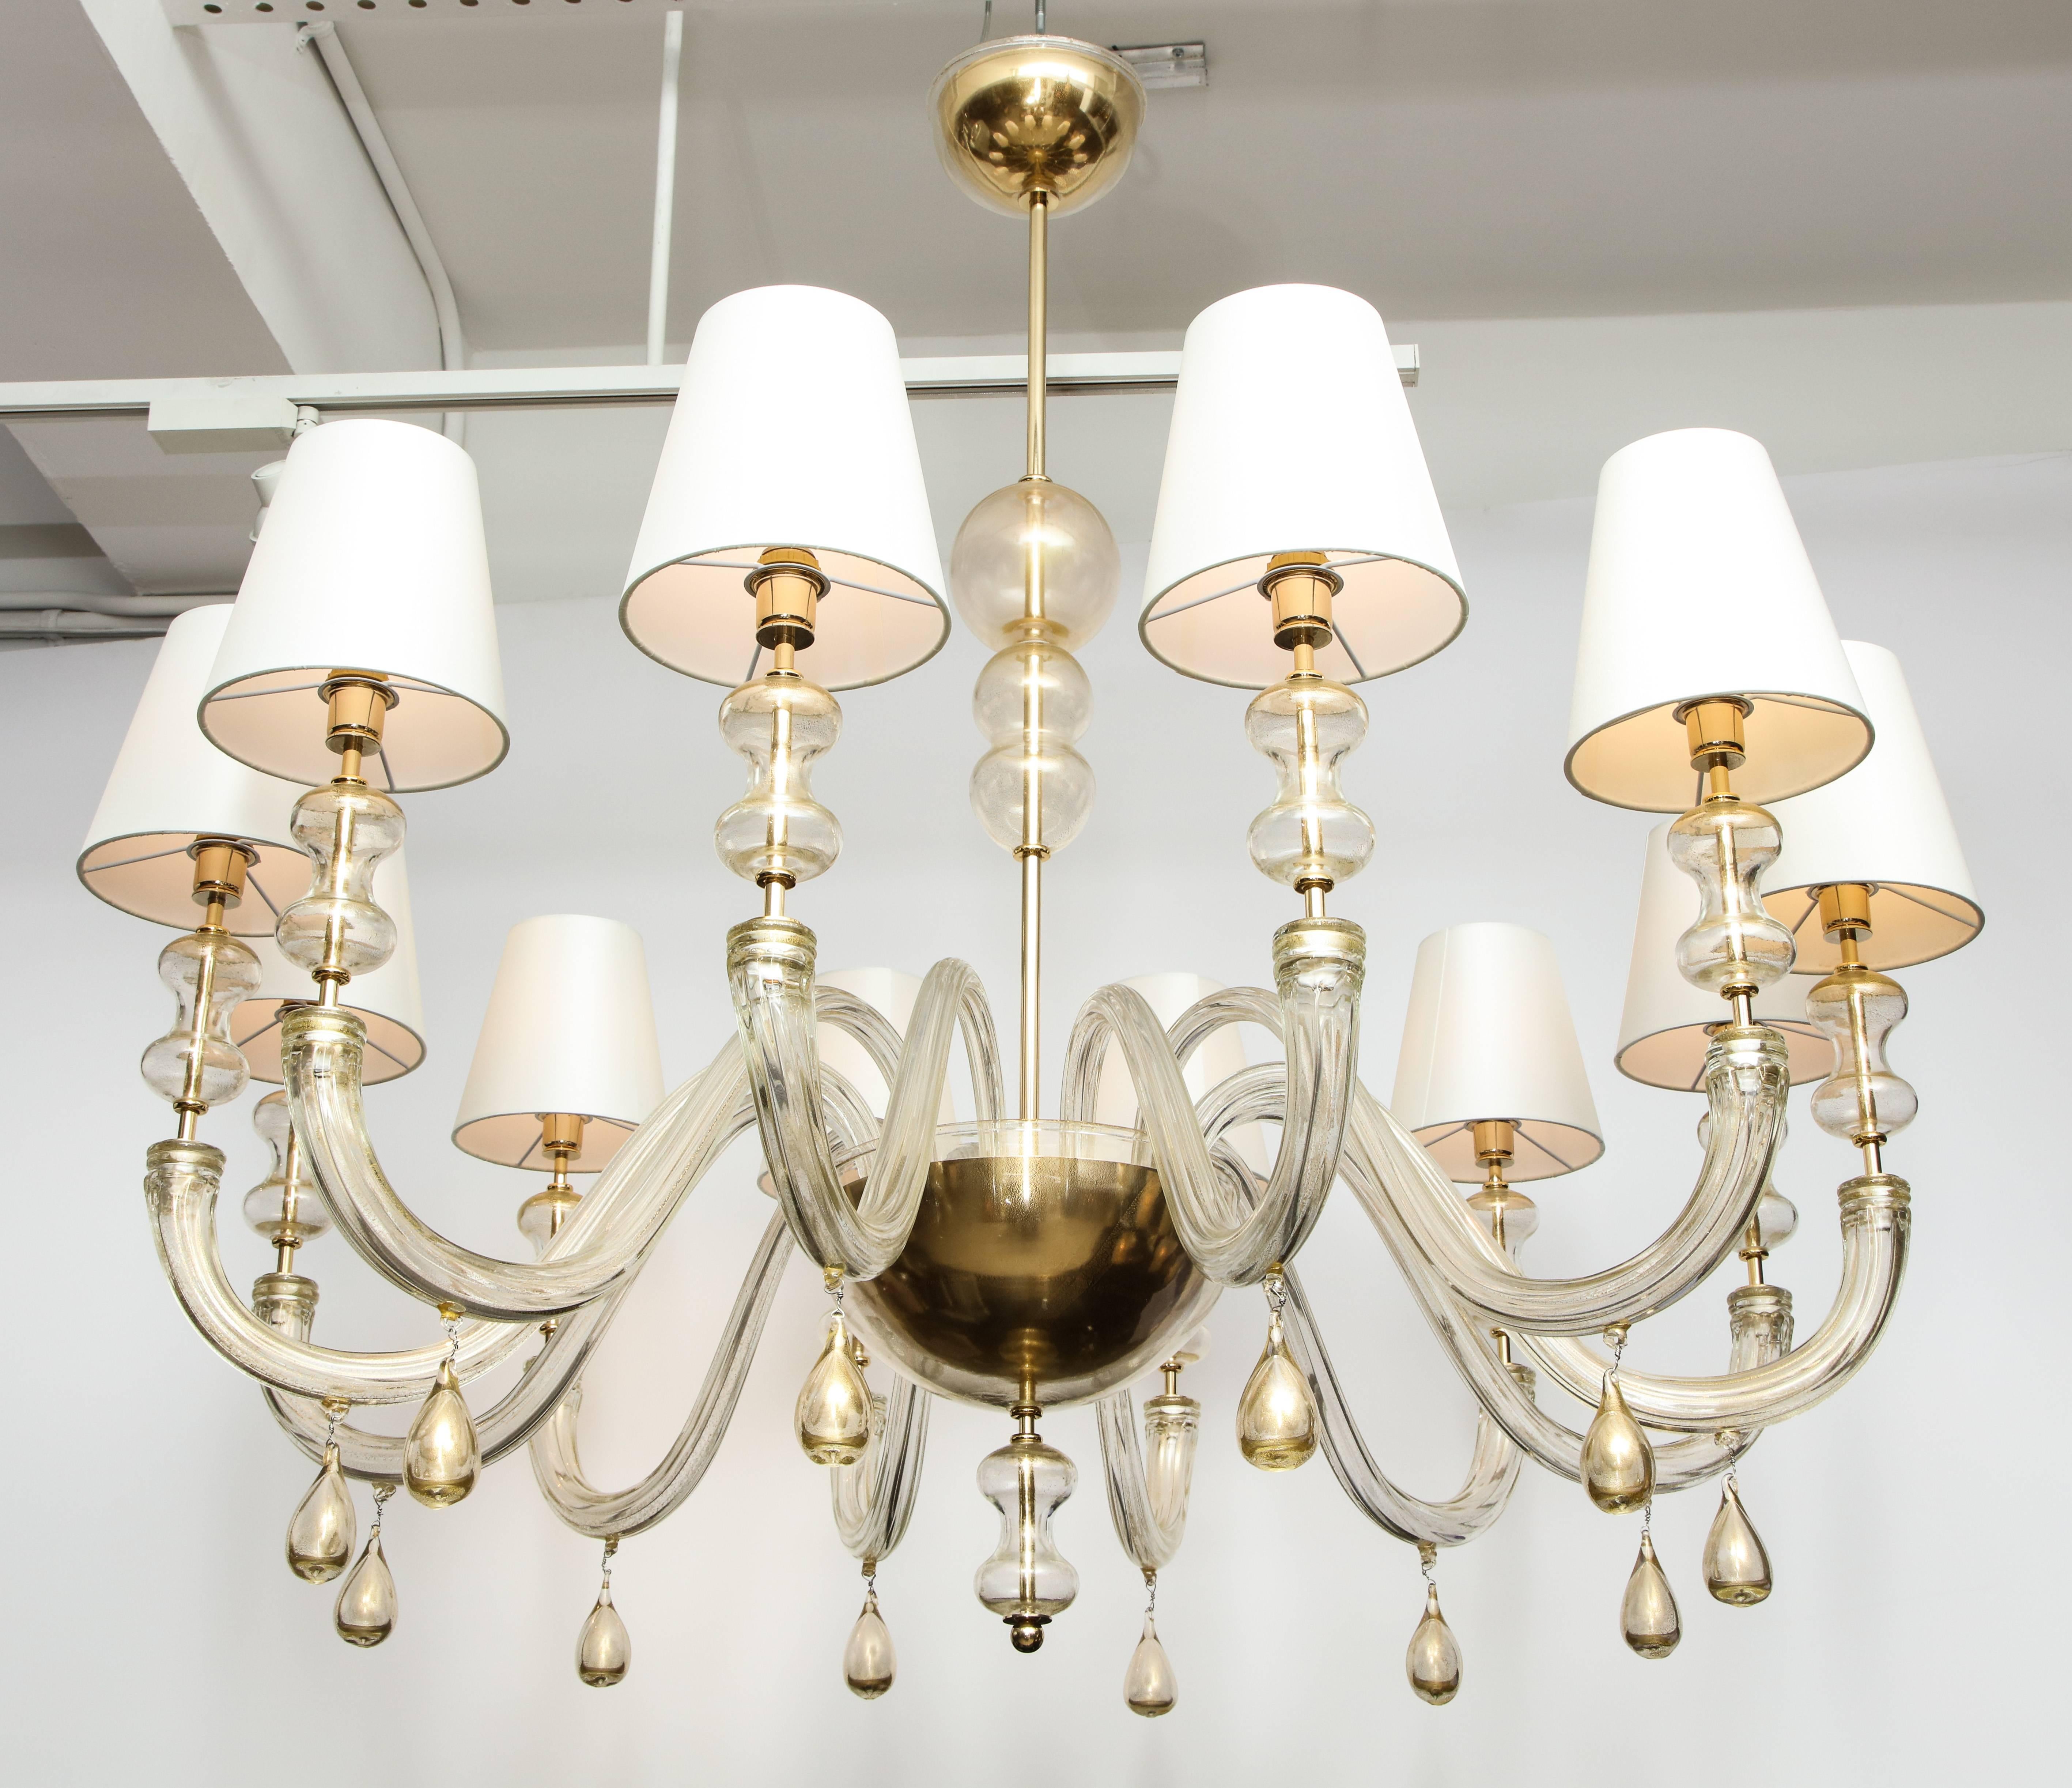 Classic but with a modern twist. This elegant Italian modernist chandelier in Murano clear glass with 23-karat gold flecks is comprised of 12 arms, each glass arm is adorned with a glass drop and a silk ivory lampshade the clear glass is infused